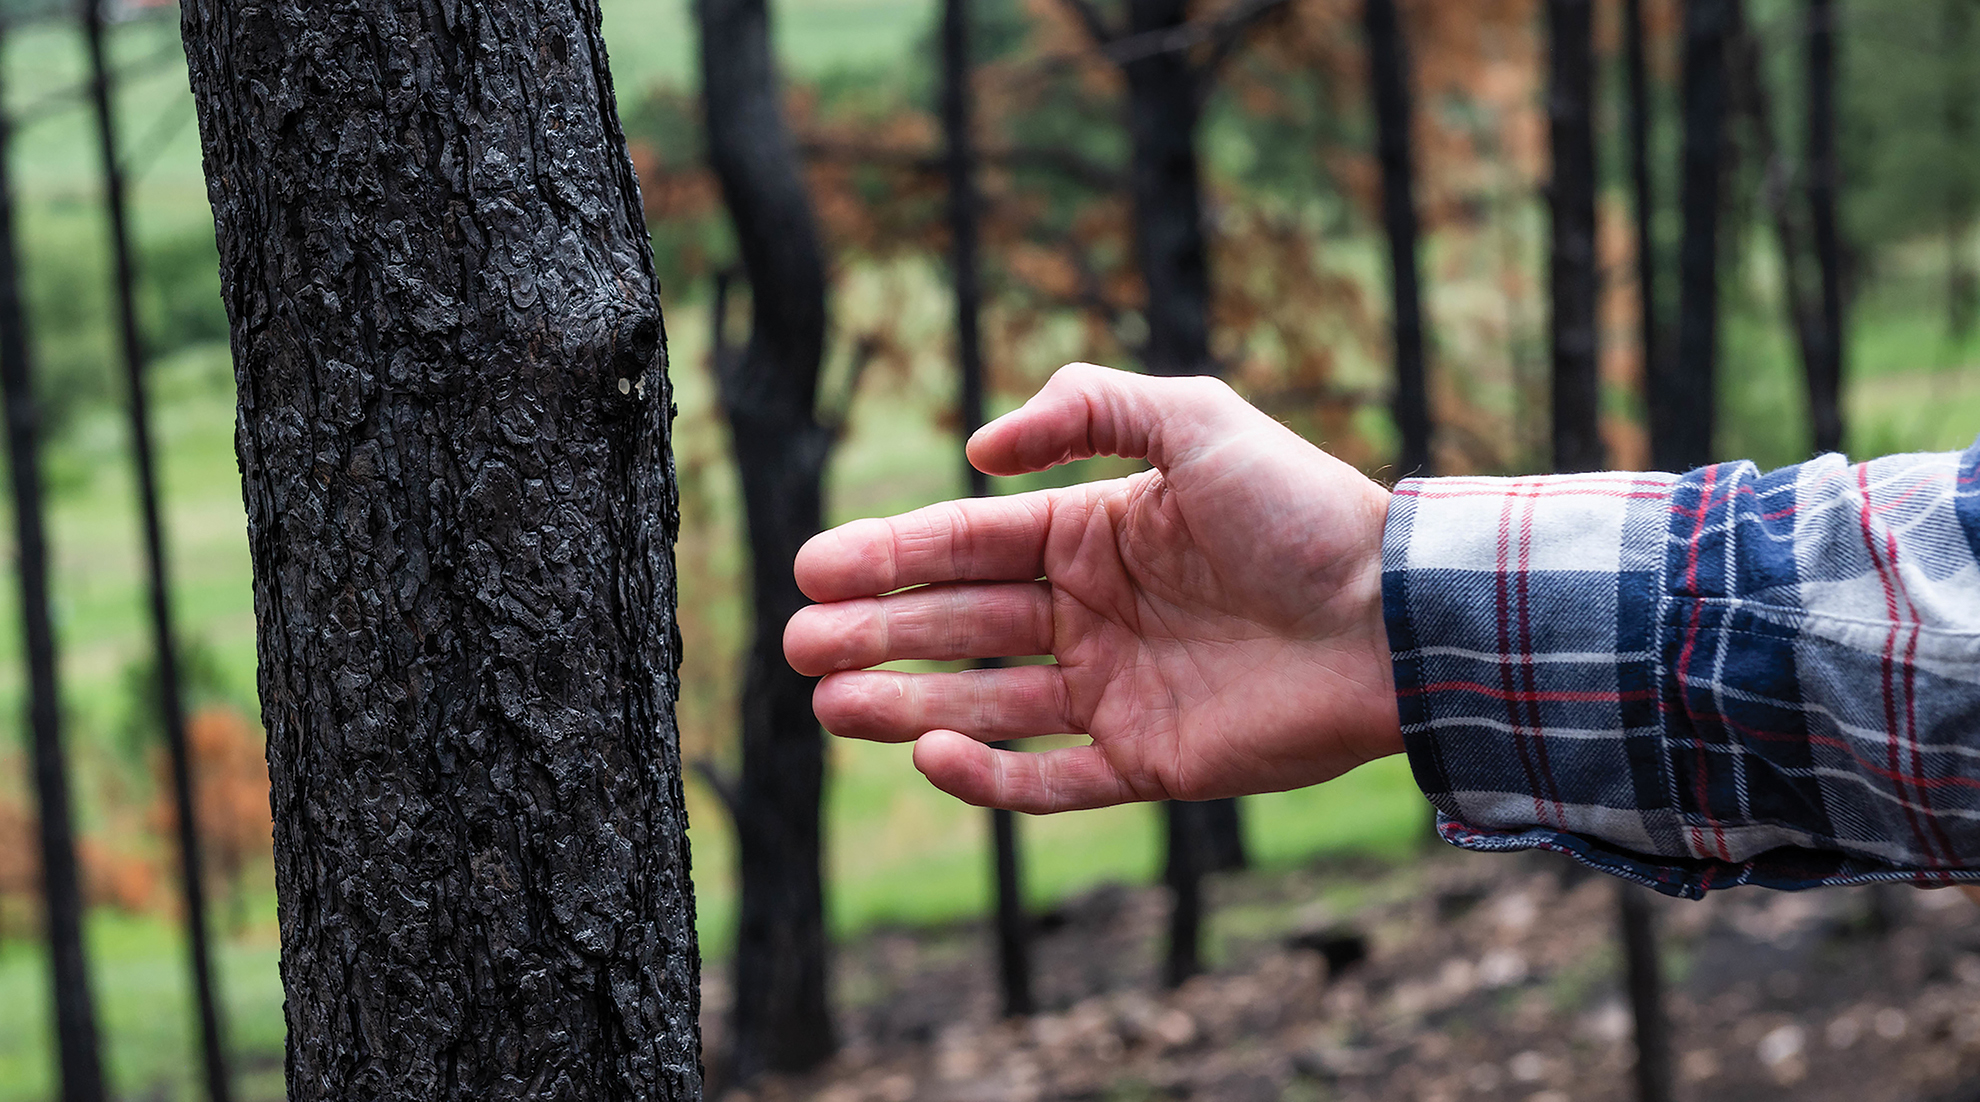 Man reaching out towards tree trunk